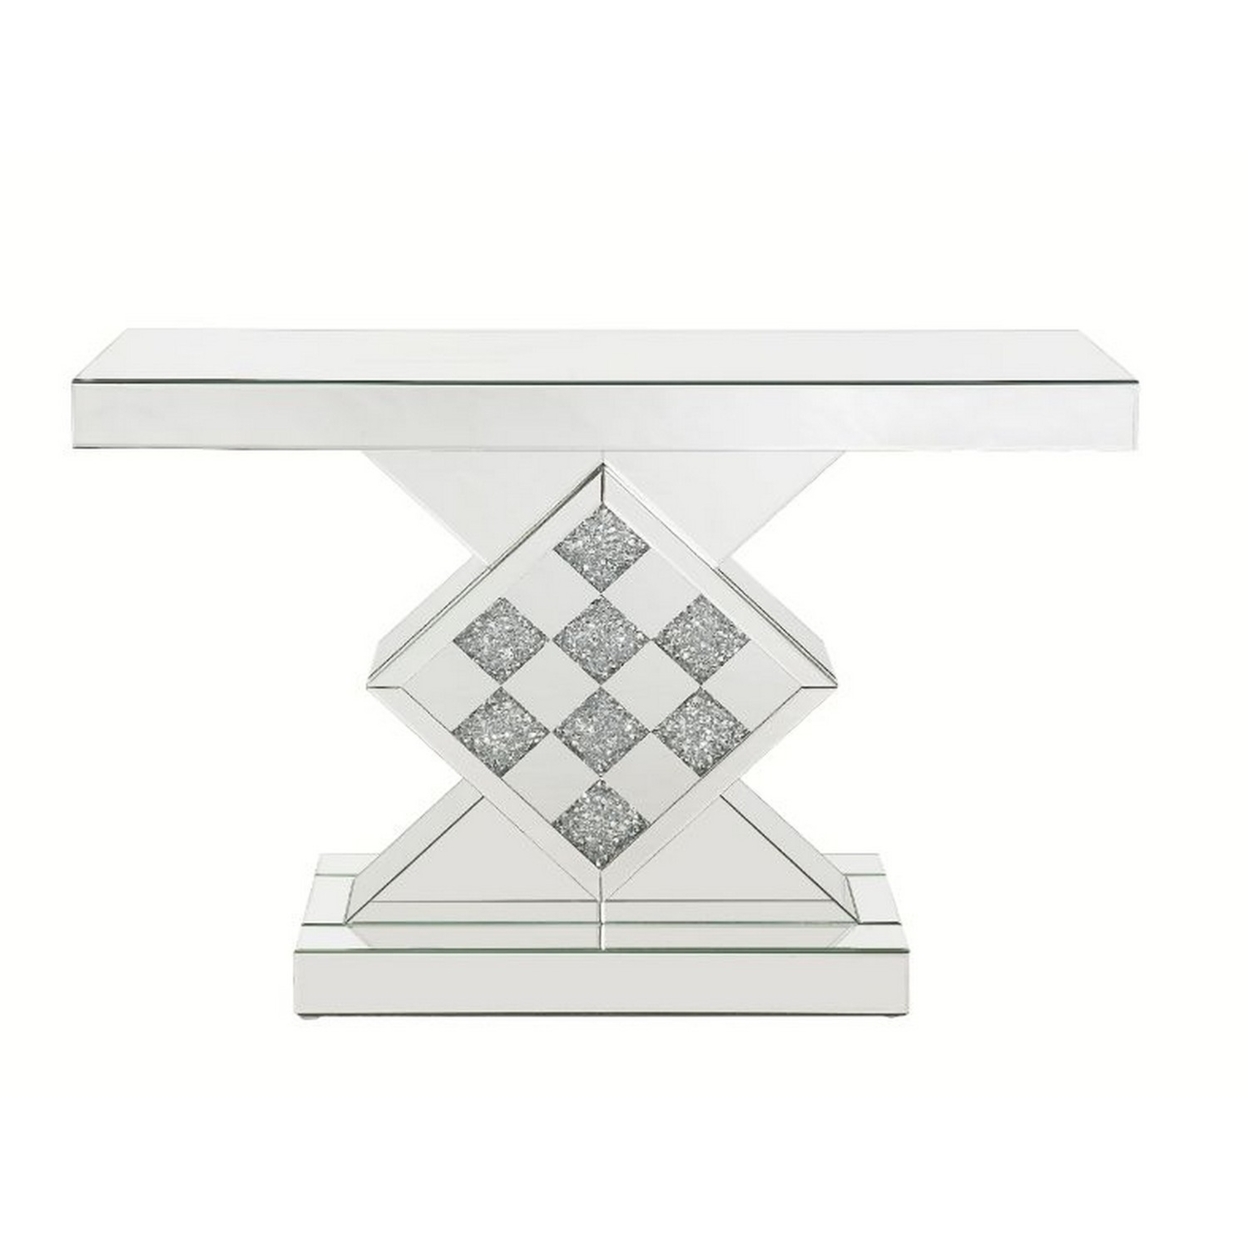 Console Table With Mirror Frame And Pedestal Base, Silver- Saltoro Sherpi